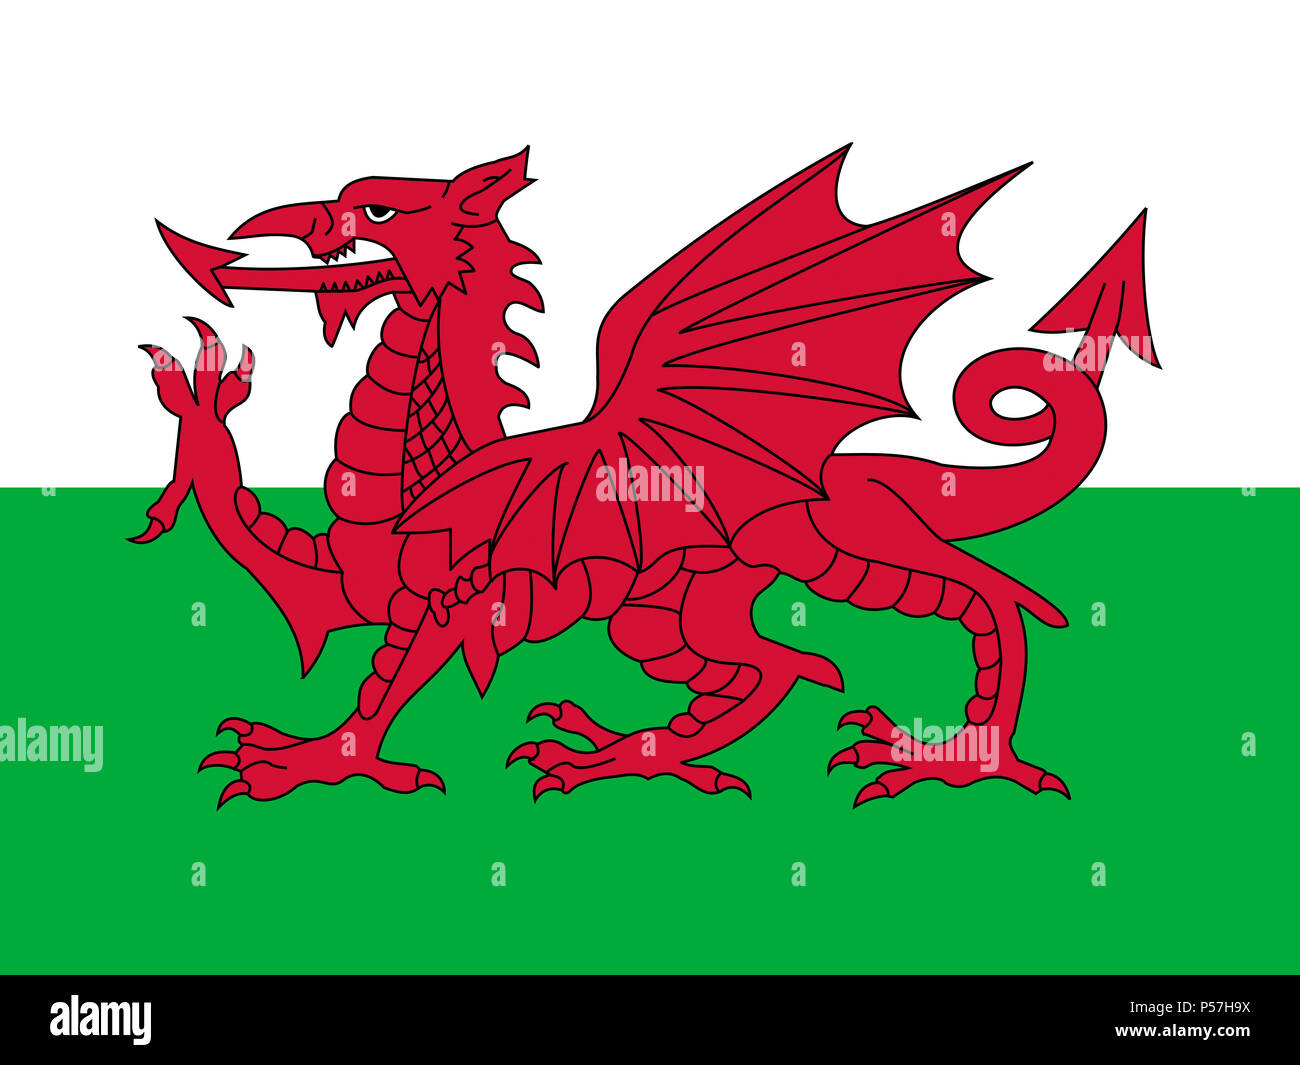 Official national flag of Wales Stock Photo